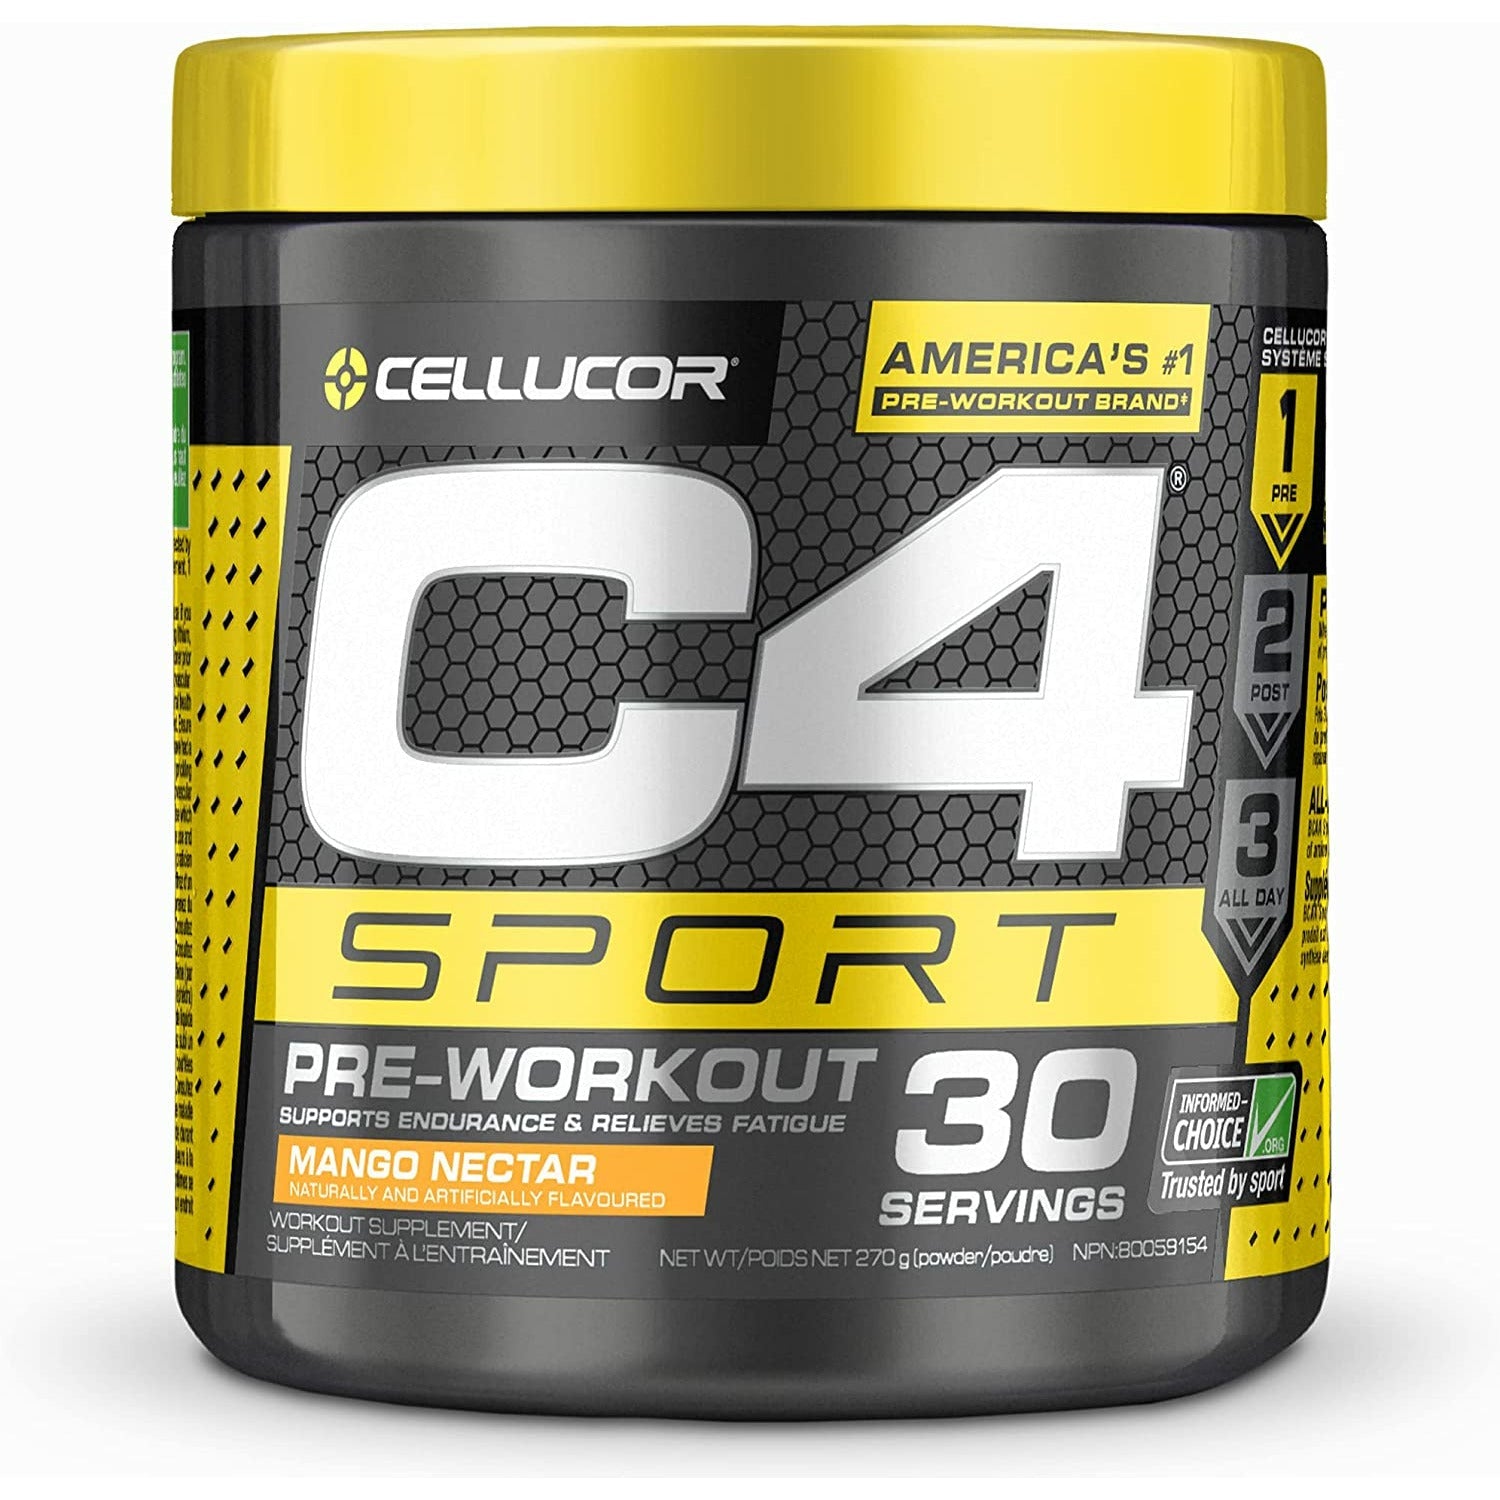 Cellucor NEW C4 SPORT Pre-Workout 30 servings Cellucor Top Nutrition Canada